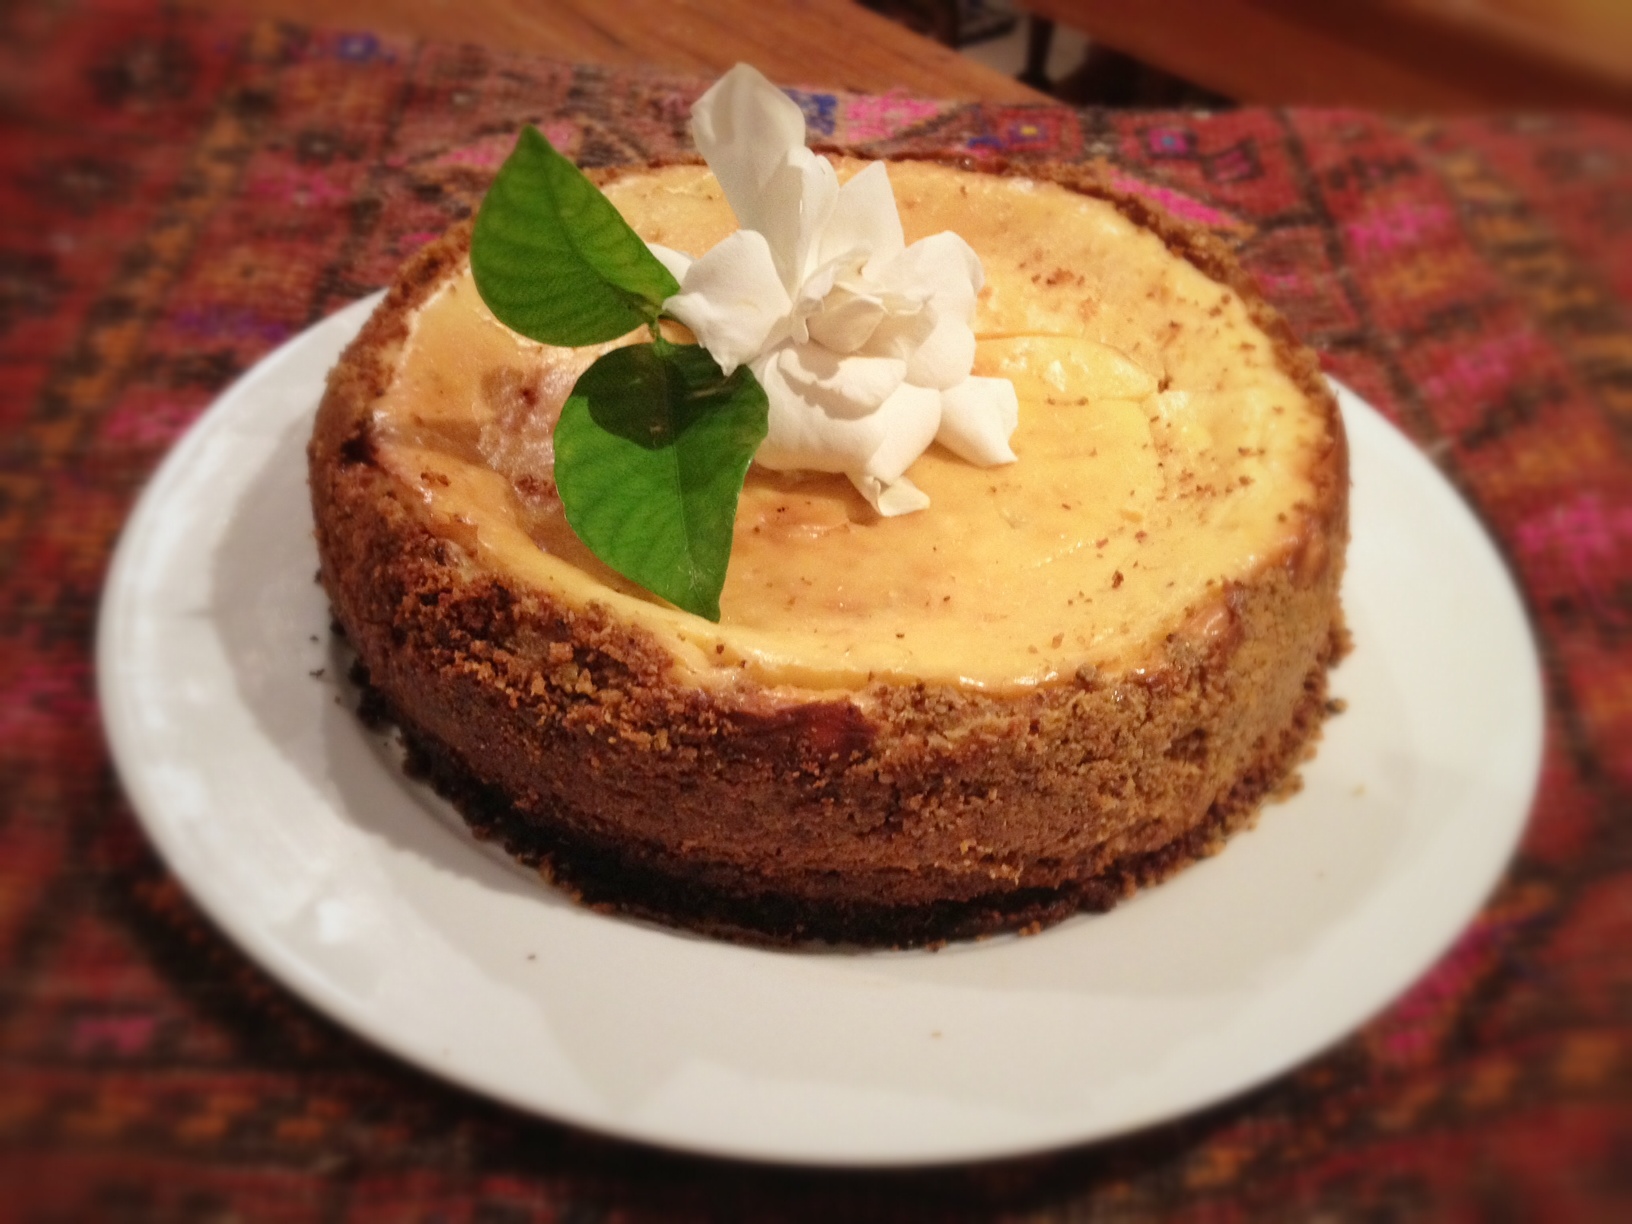 photo9 as promised, the sugar-free, grain-free cheesecake recipe (plus a recipe for kale chips)